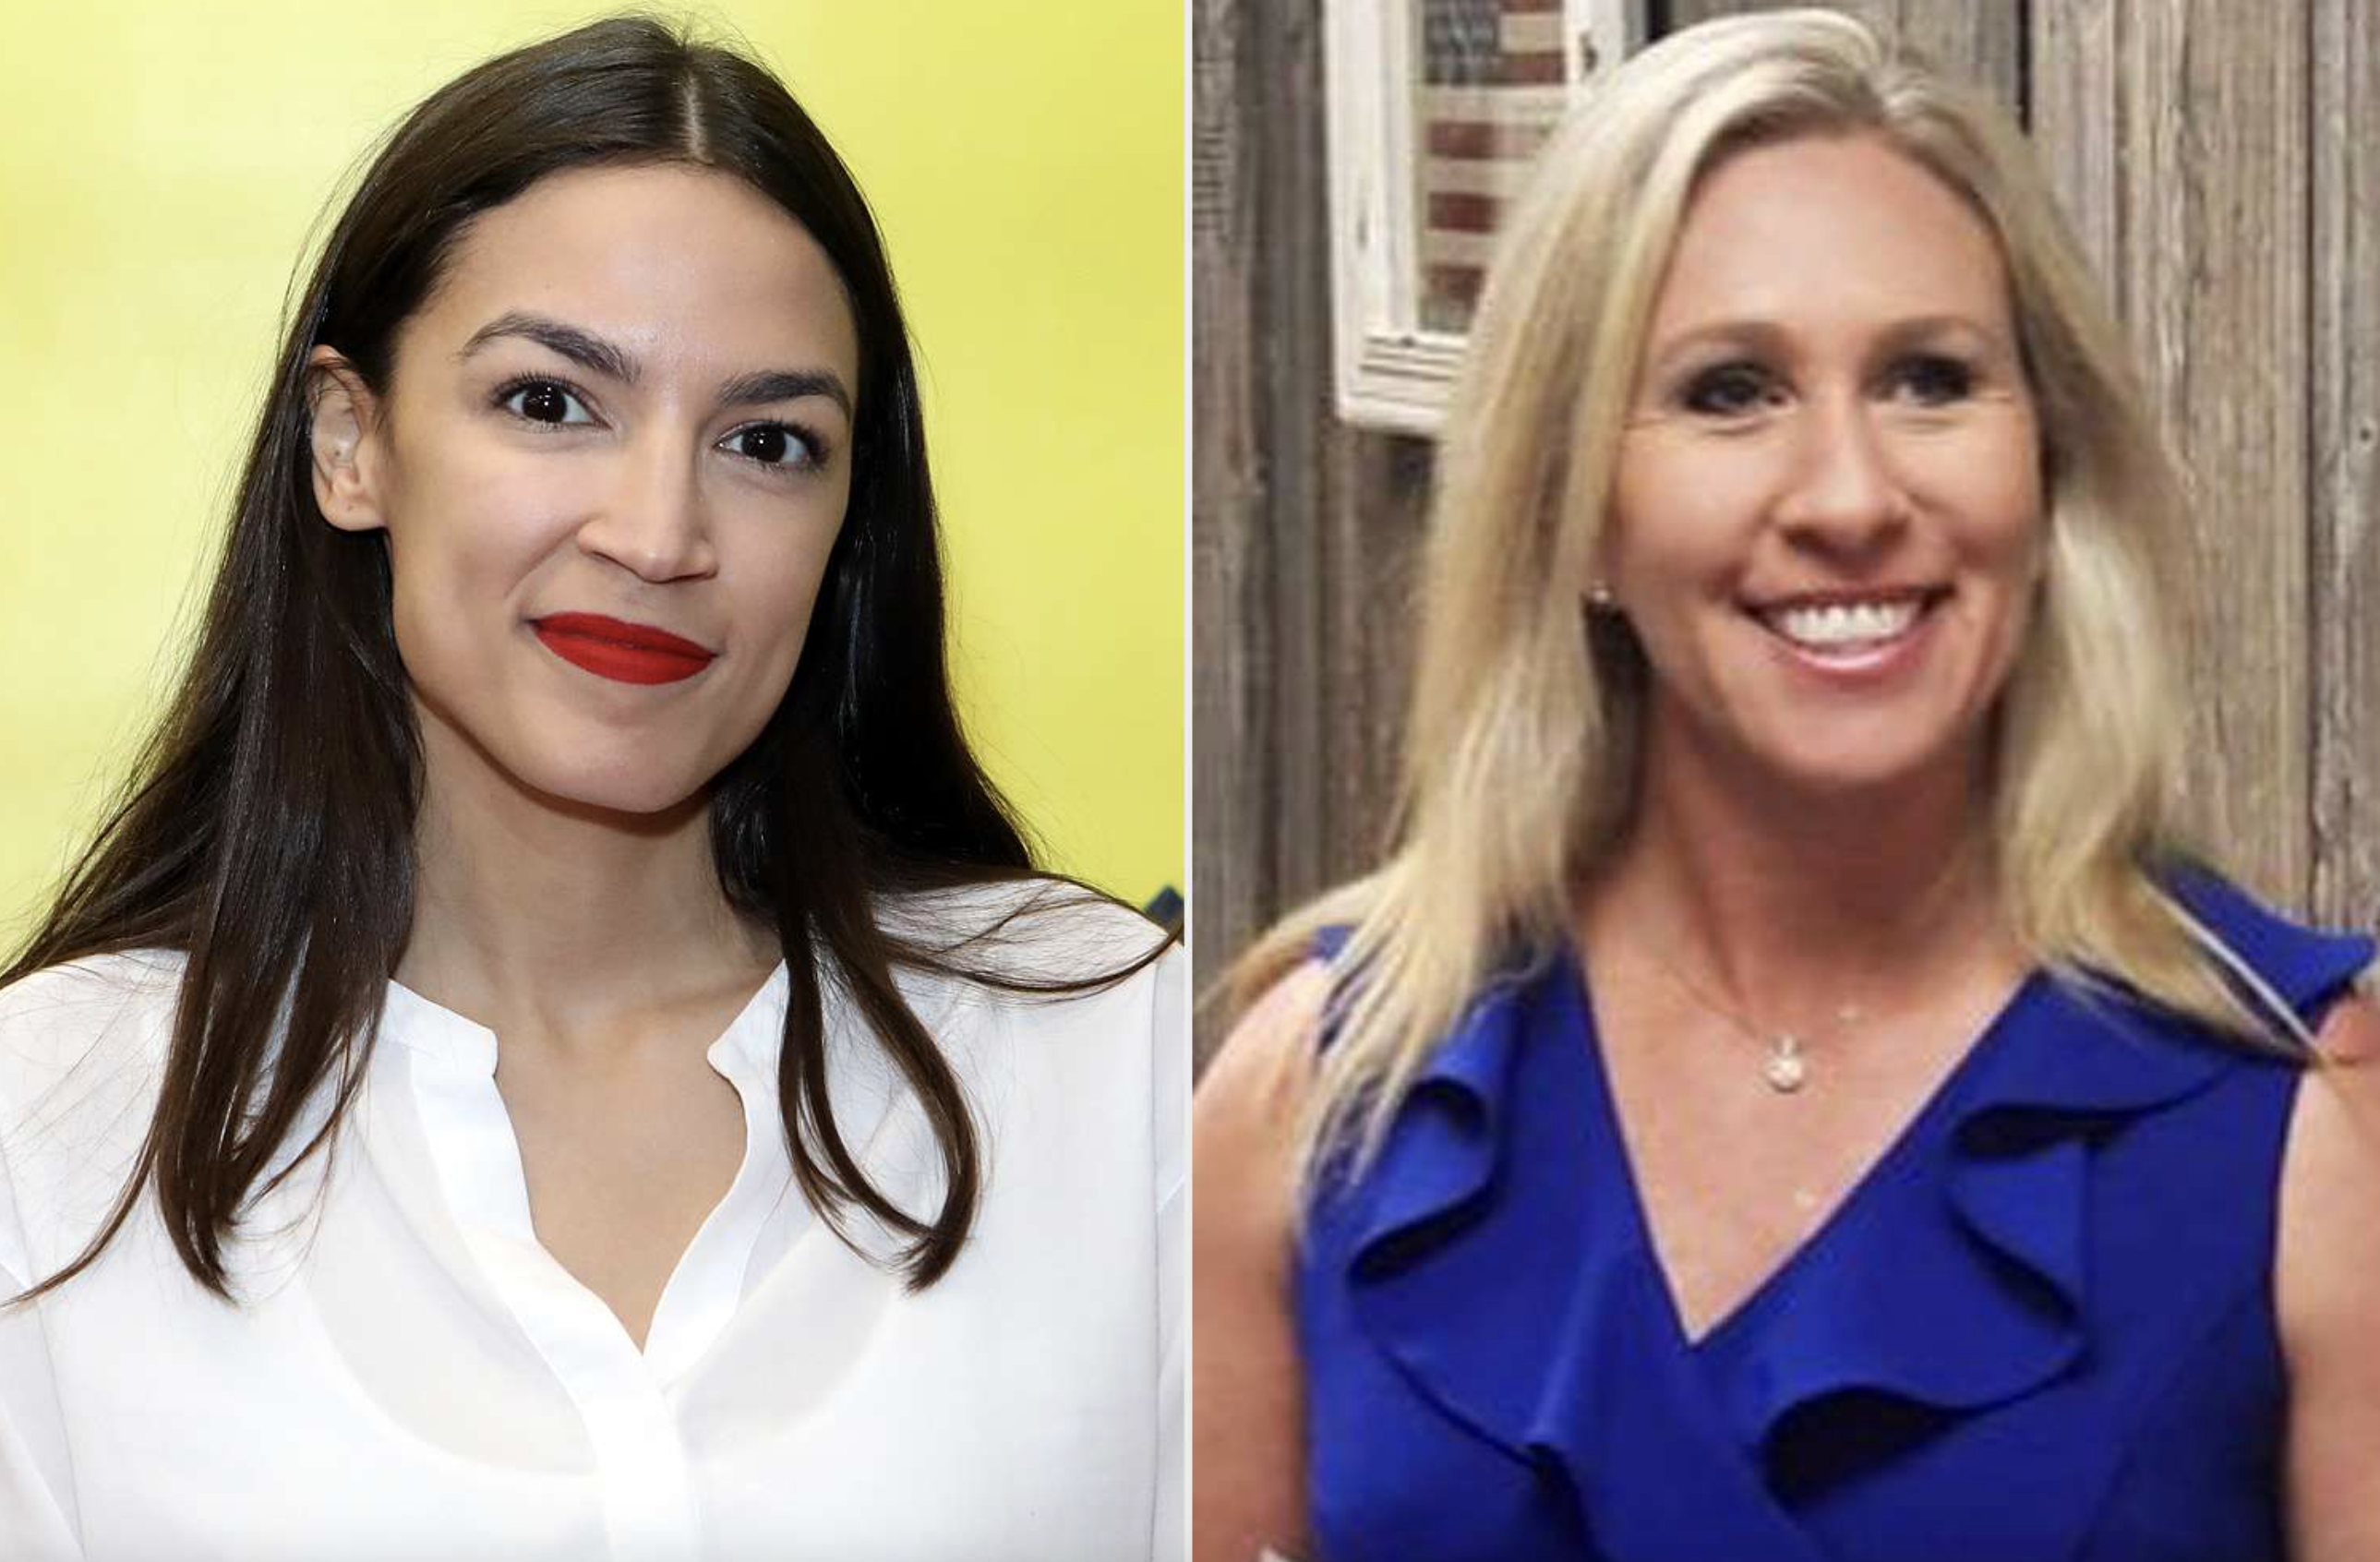 AOC Roasts MTG in Explosive Debate Over Intelligence and Glam: ‘Don’t Even Start, Honey!